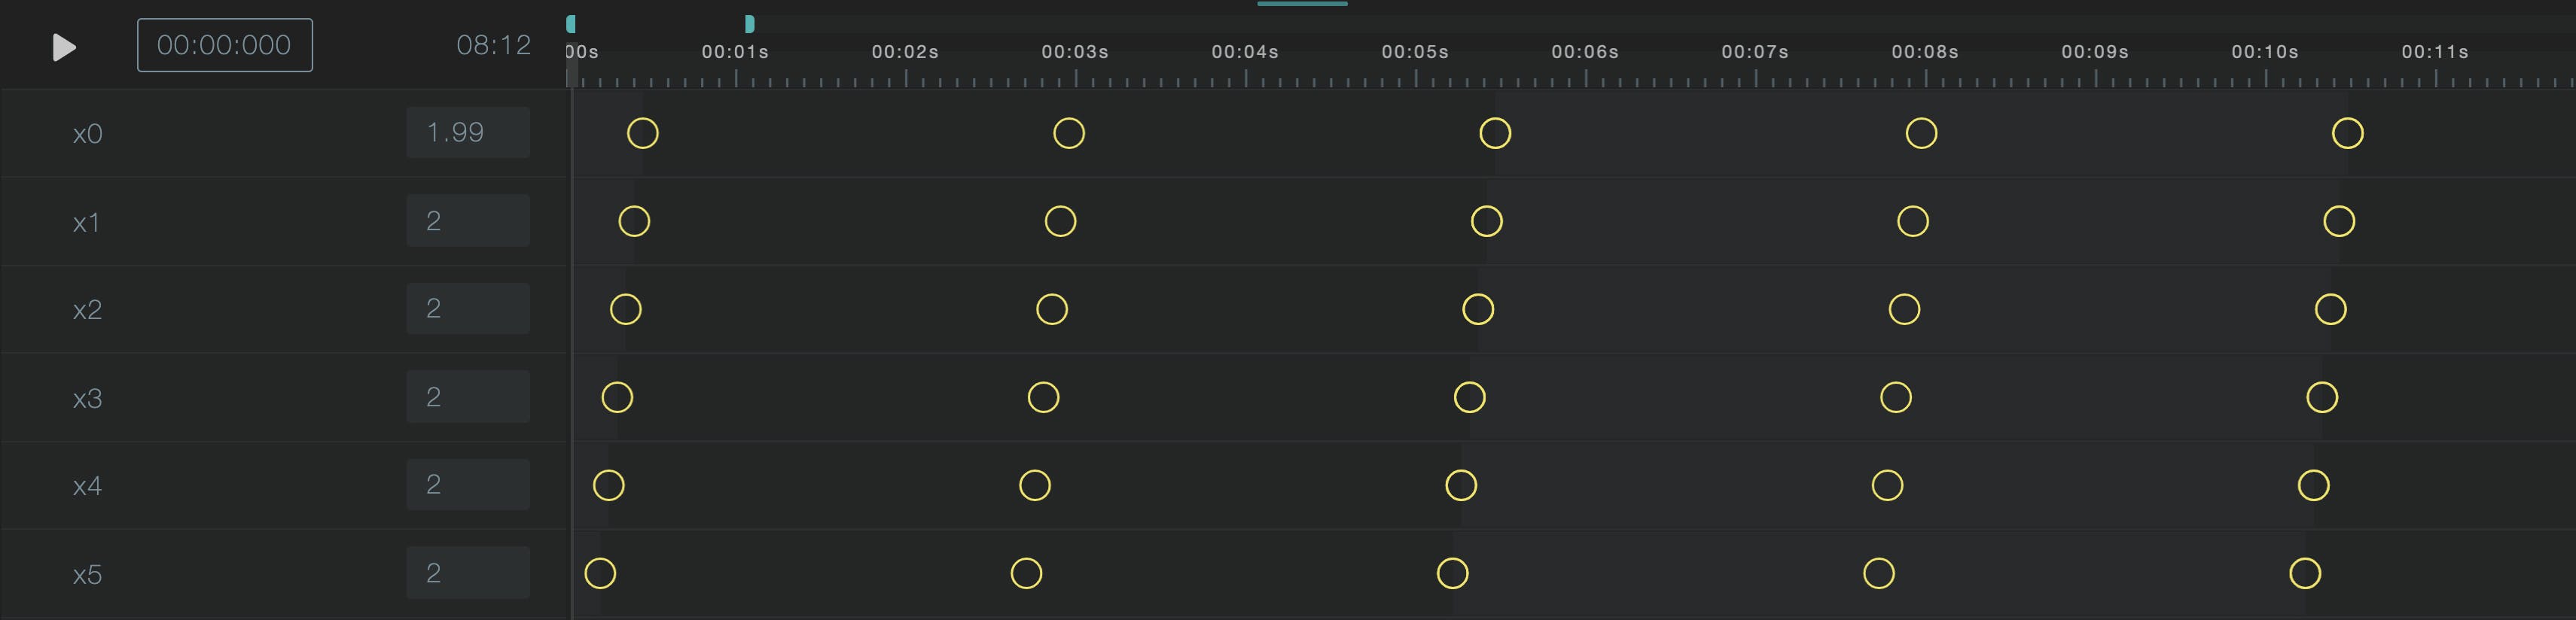 Screenshot of the Timeline UI section of the app